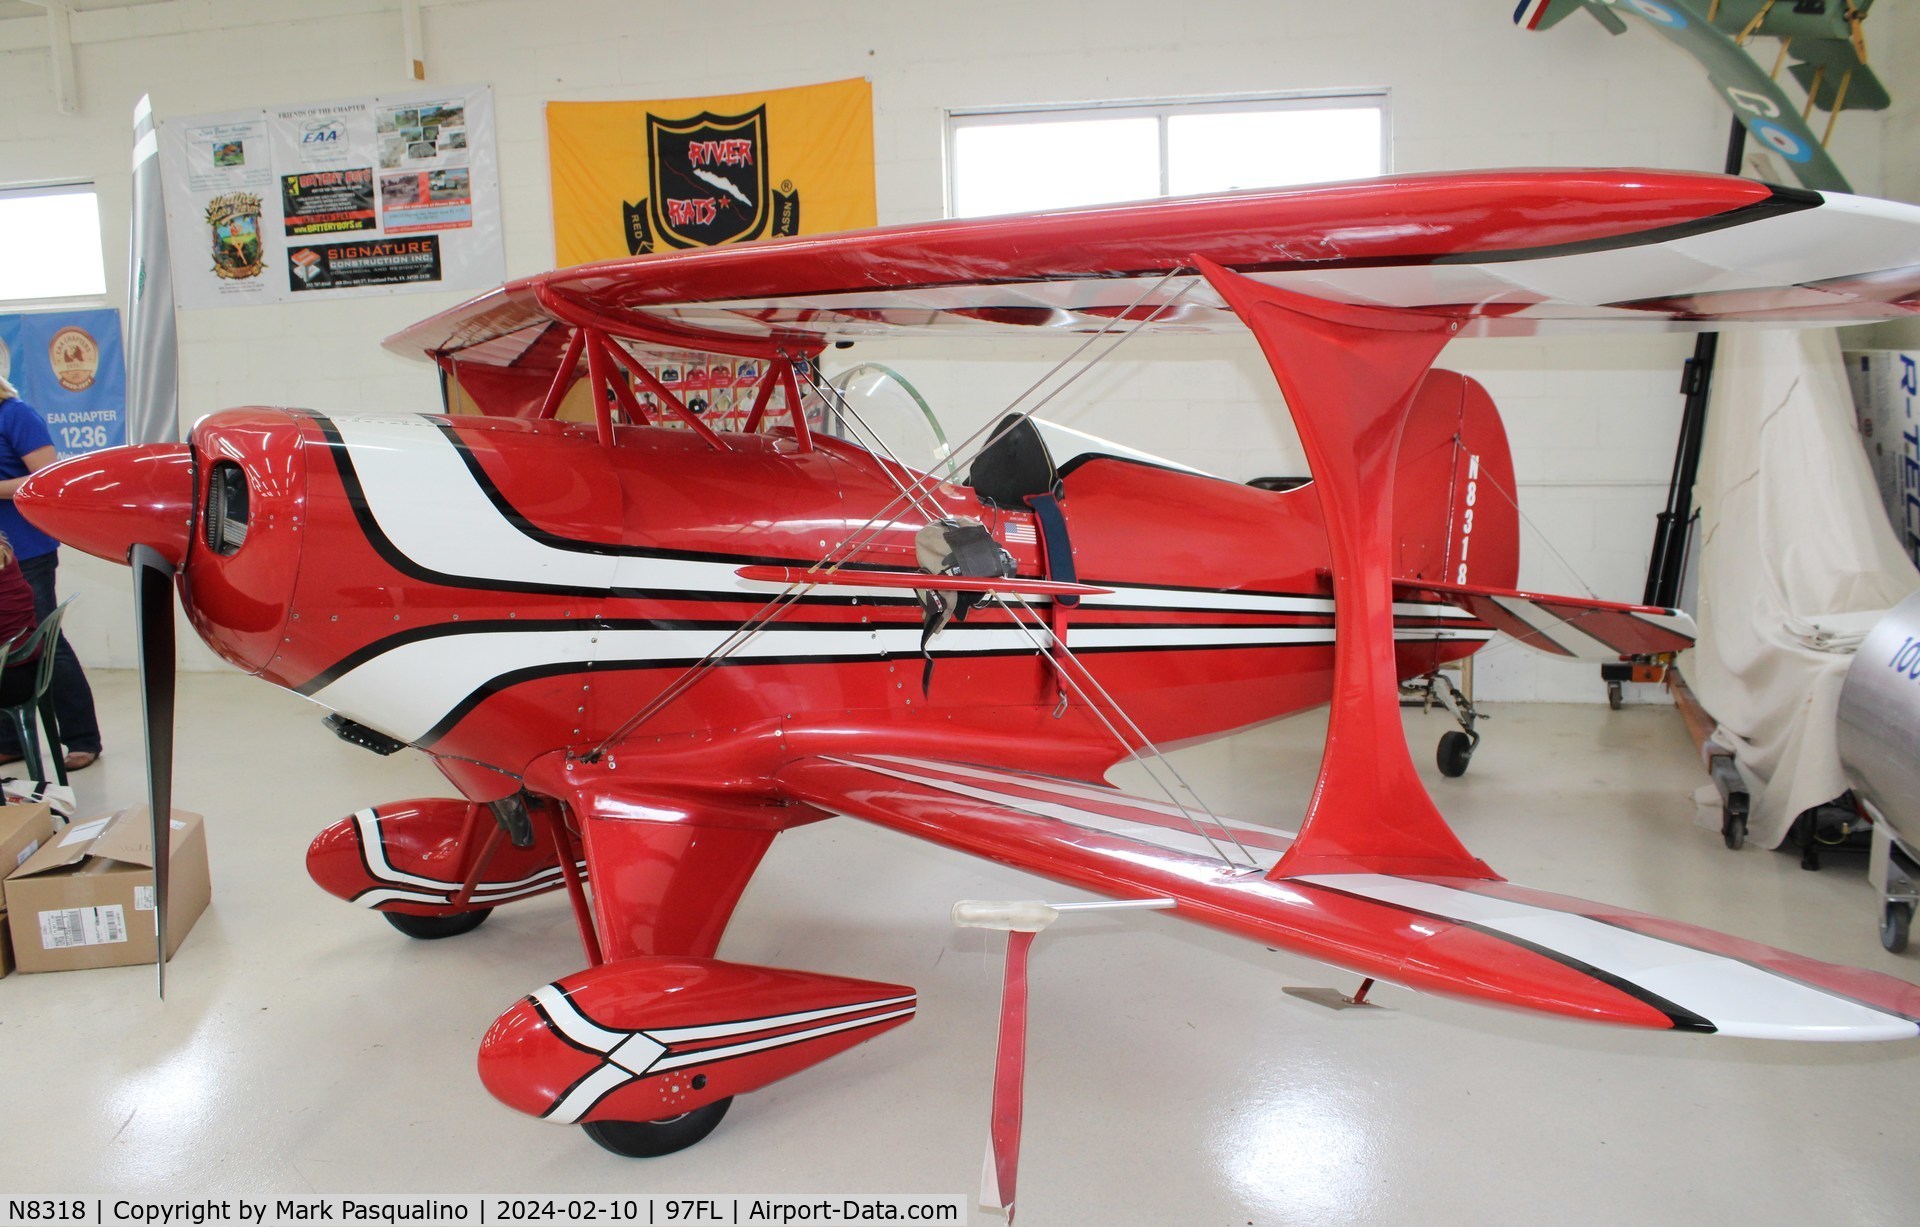 N8318, 1972 Pitts S-1C Special C/N 6223, Pitts S-1C Special